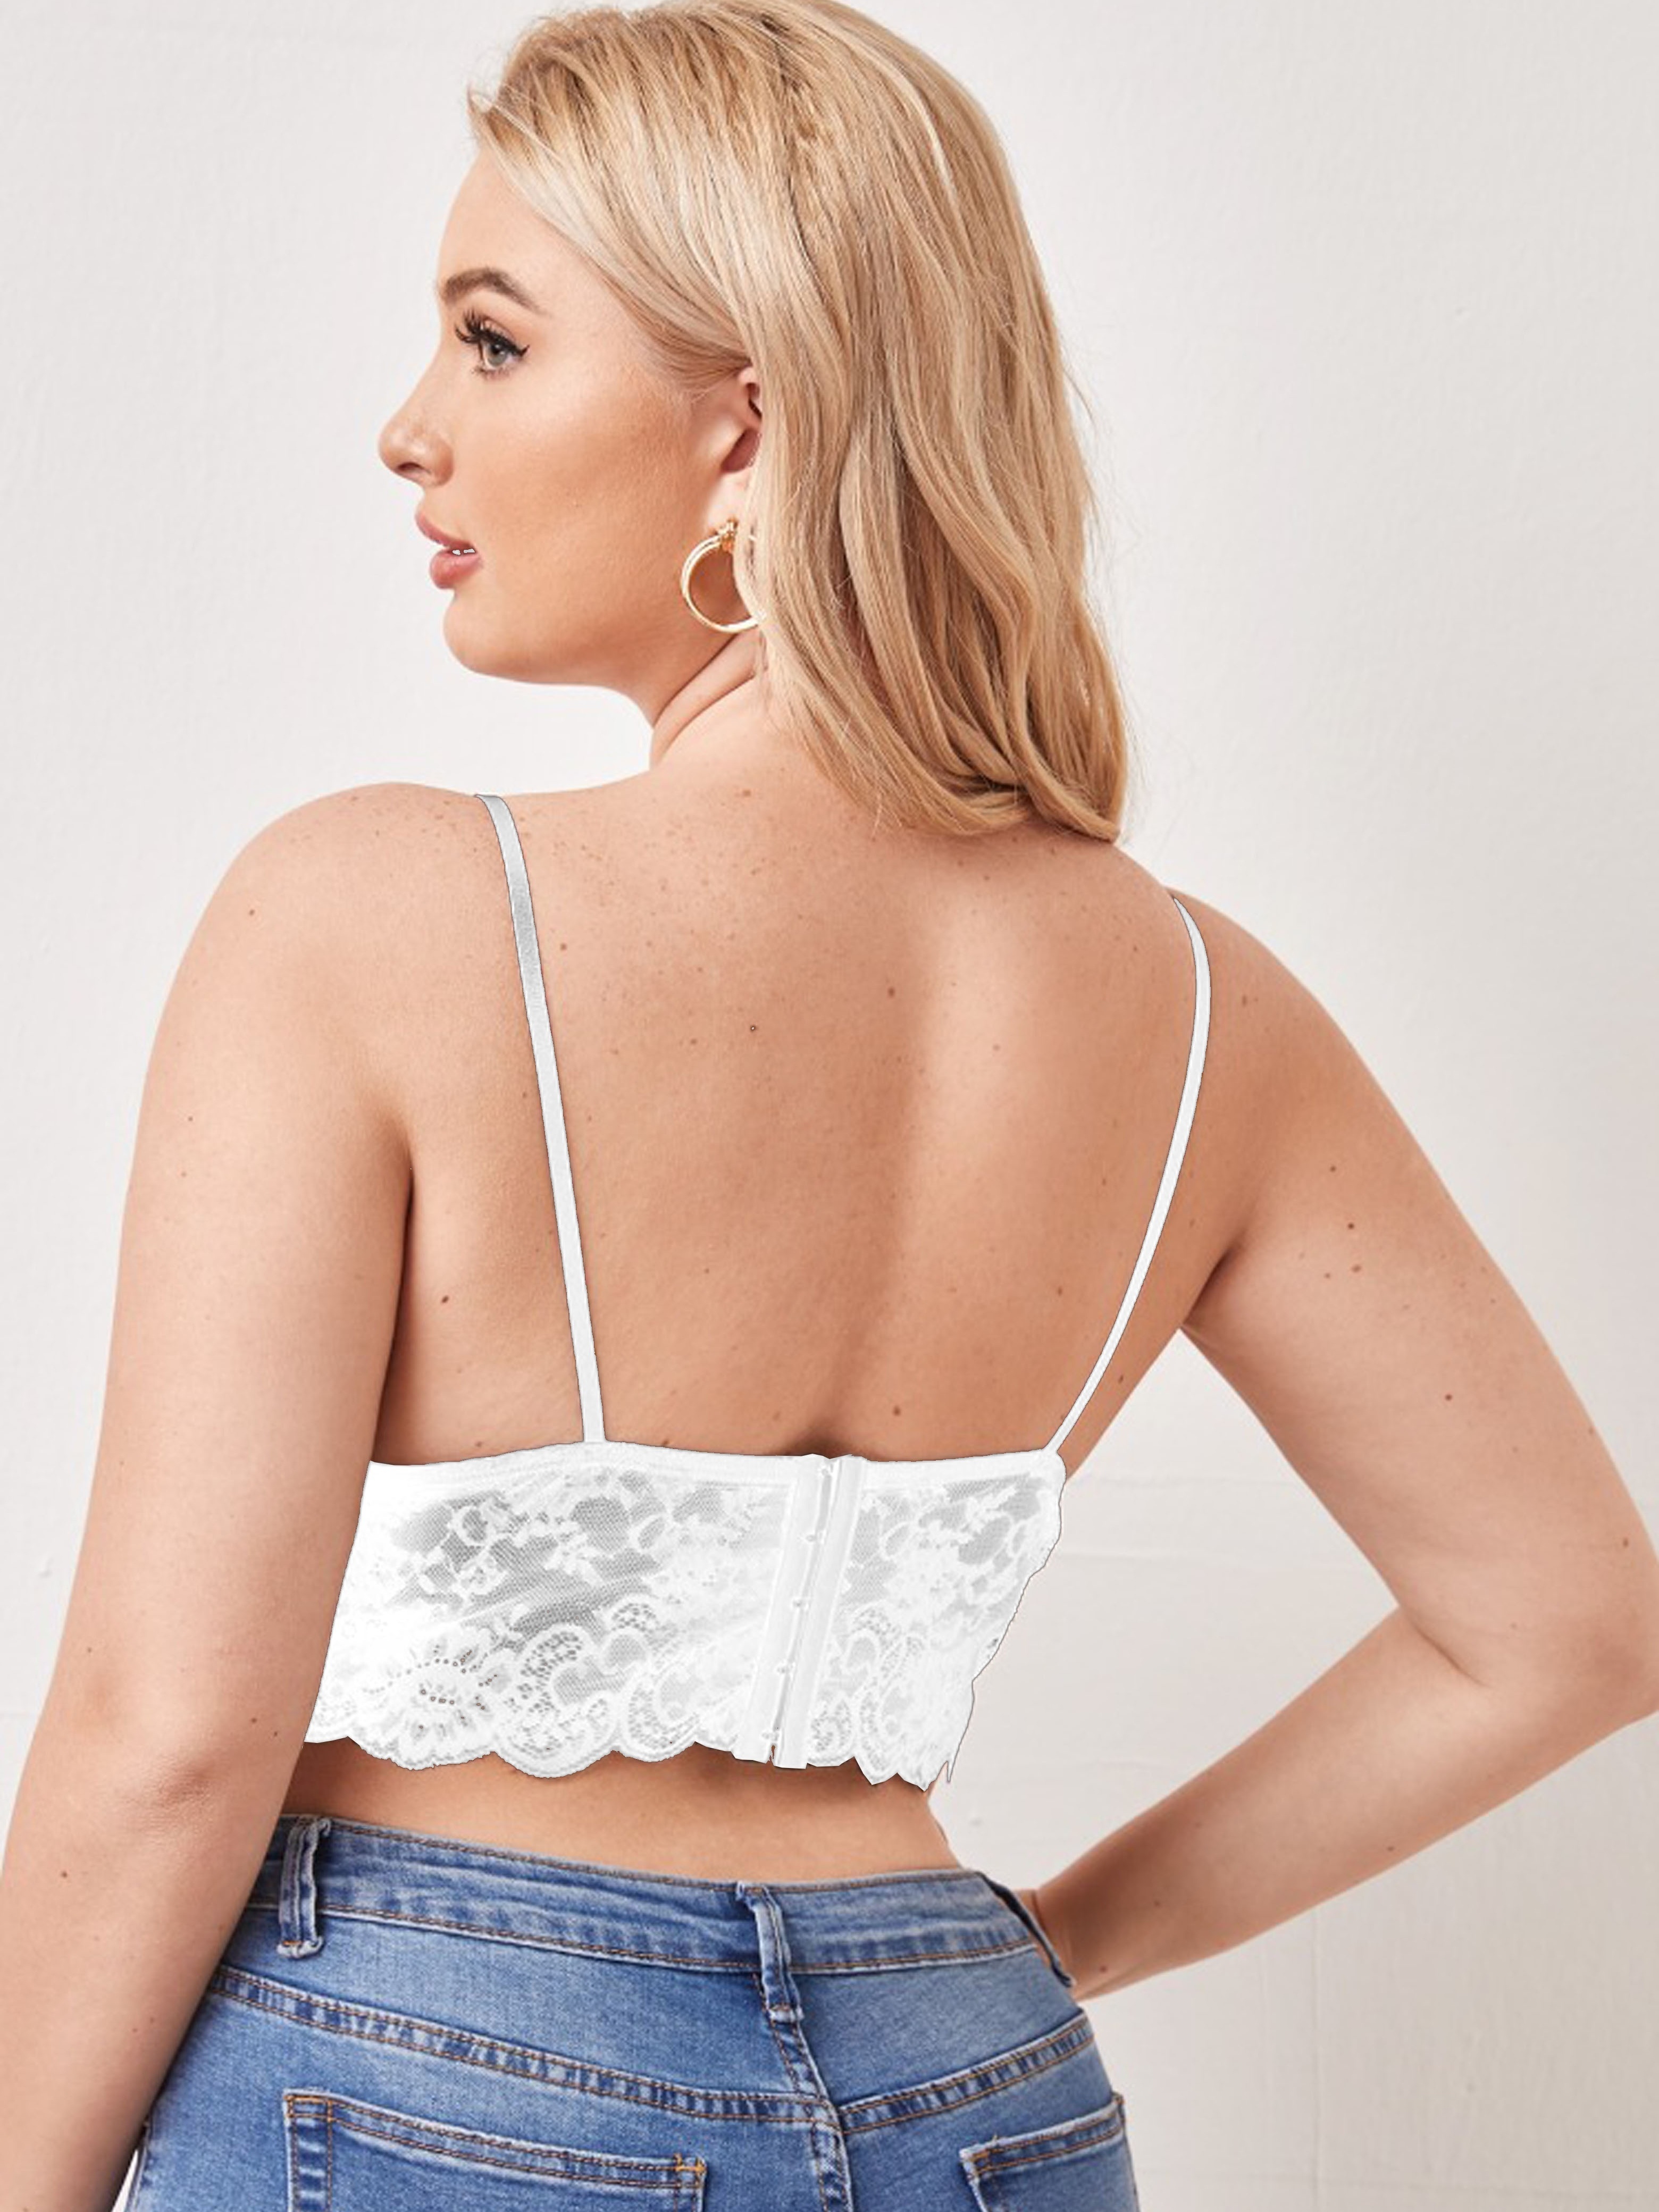 White Lace Crop Top Vintage Cropped Cami Top Sheer White Crop Top